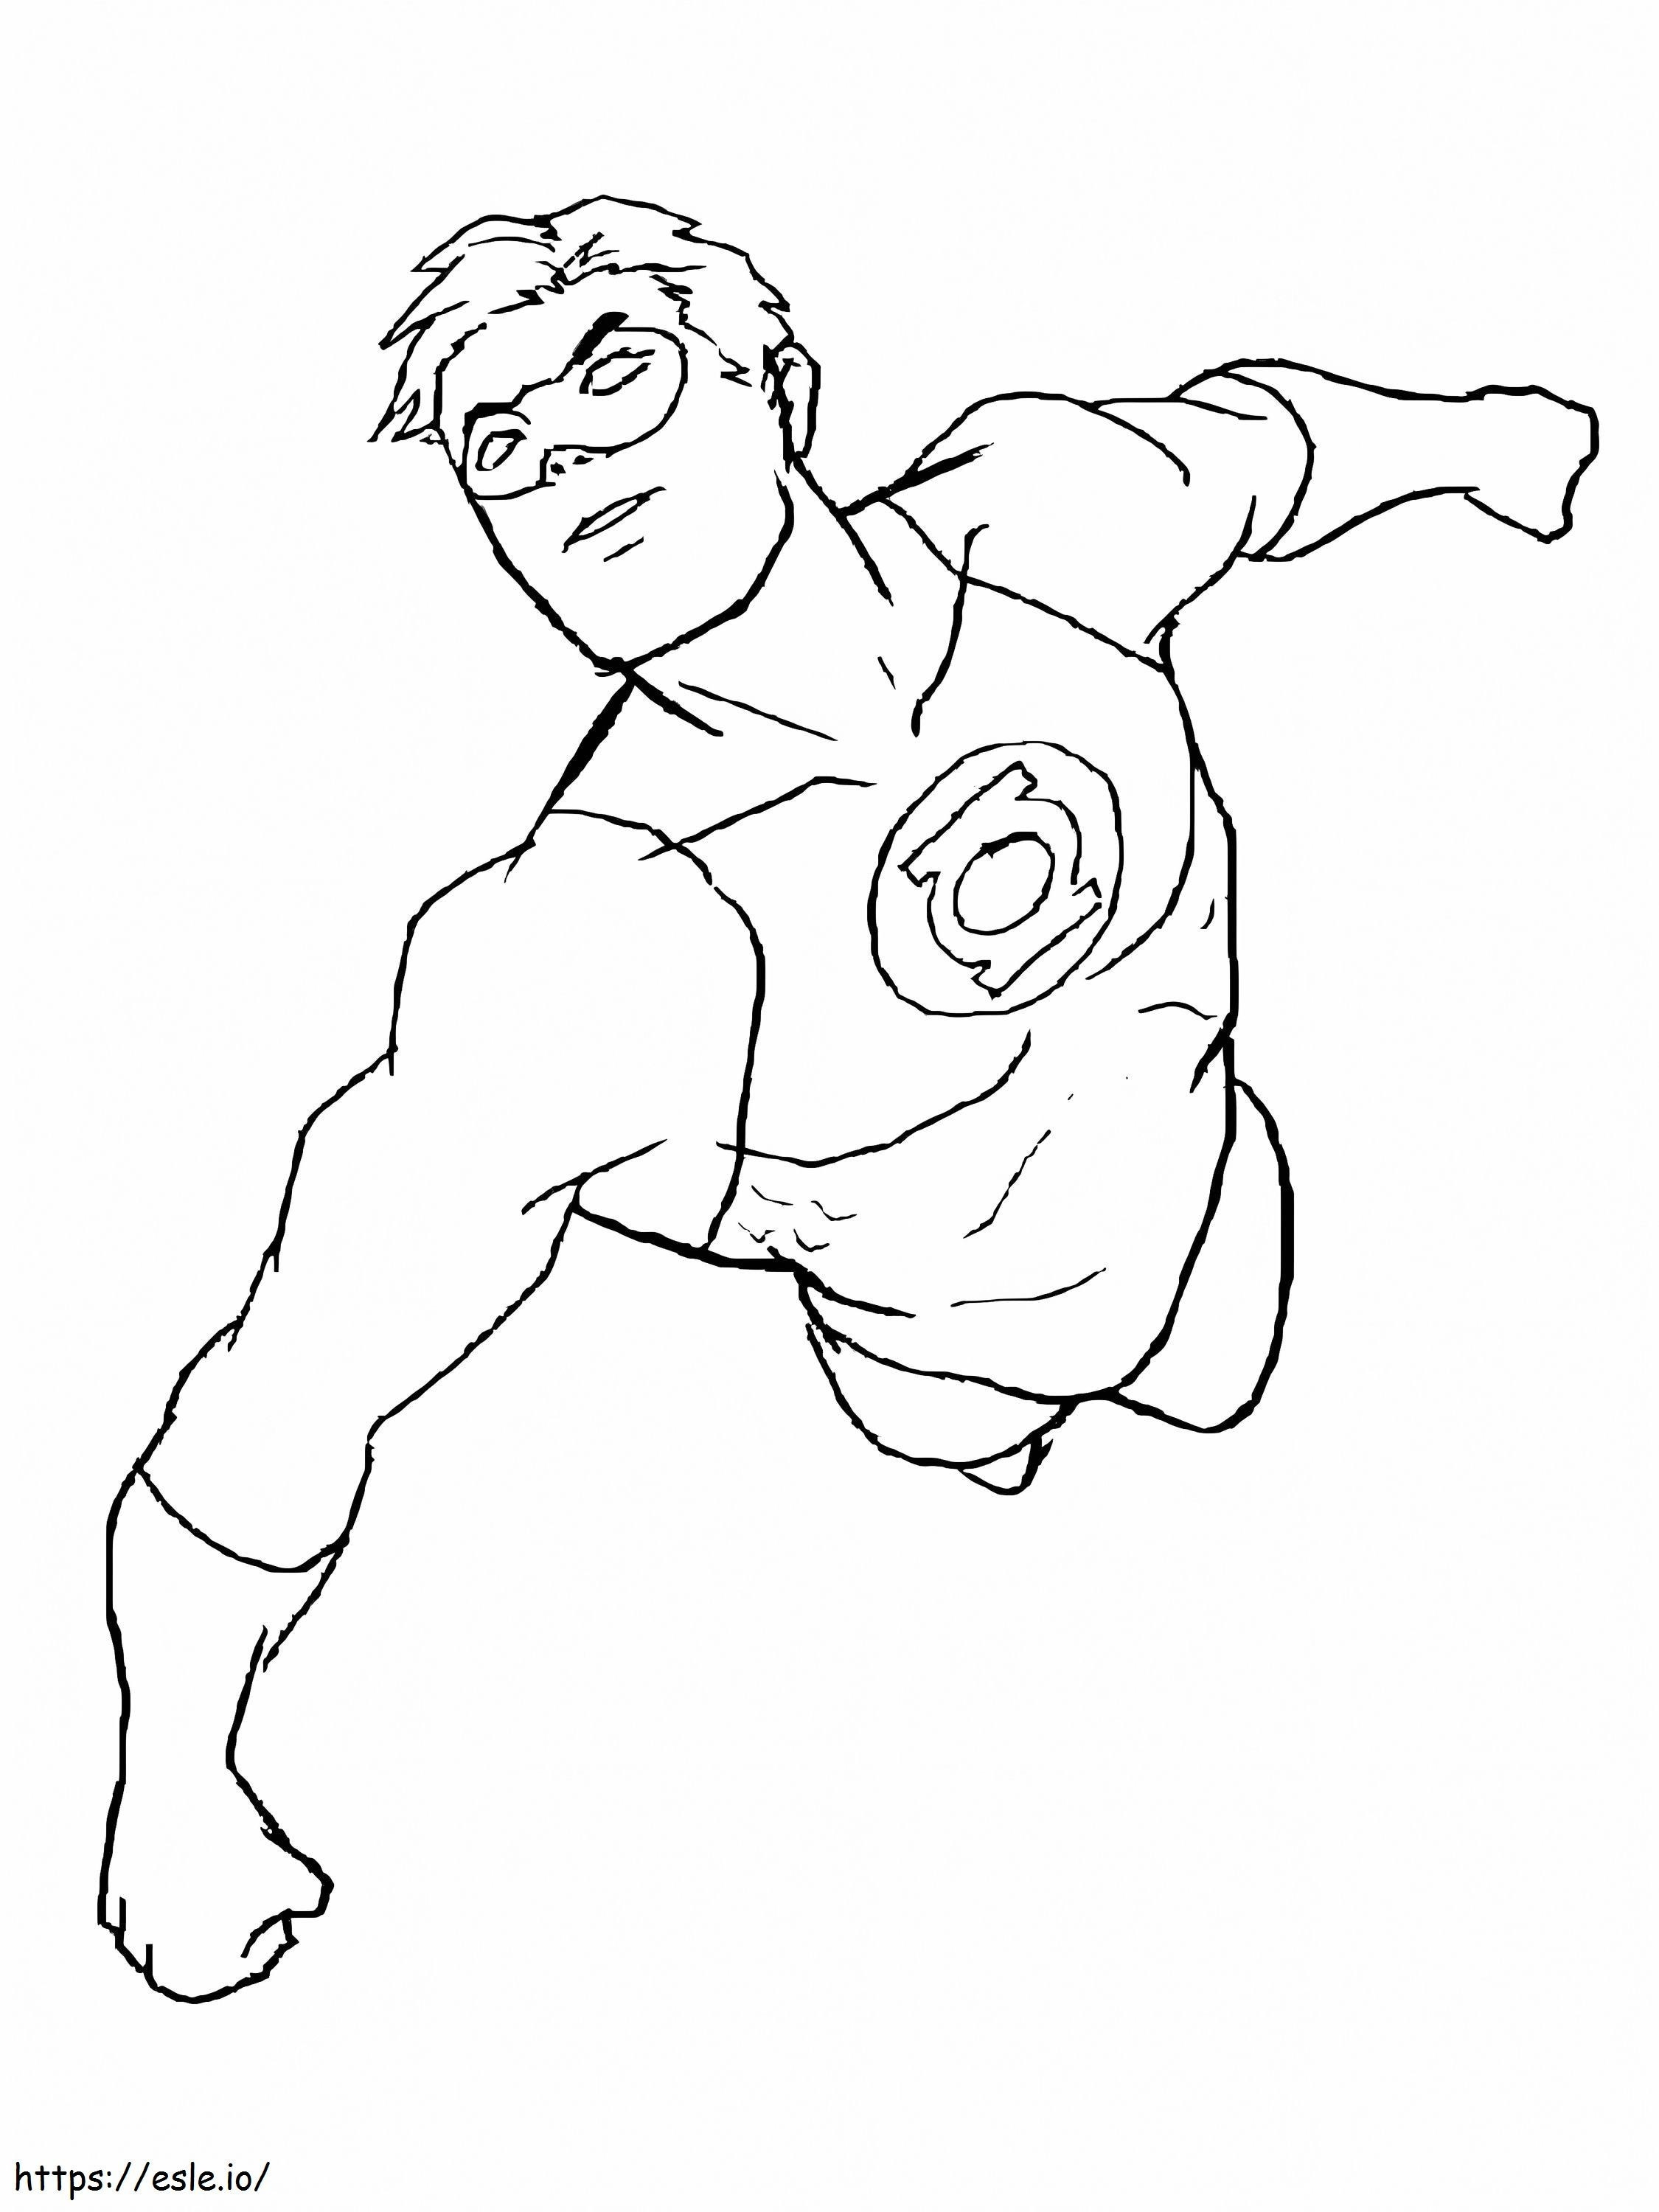 Green Lantern Fly coloring page